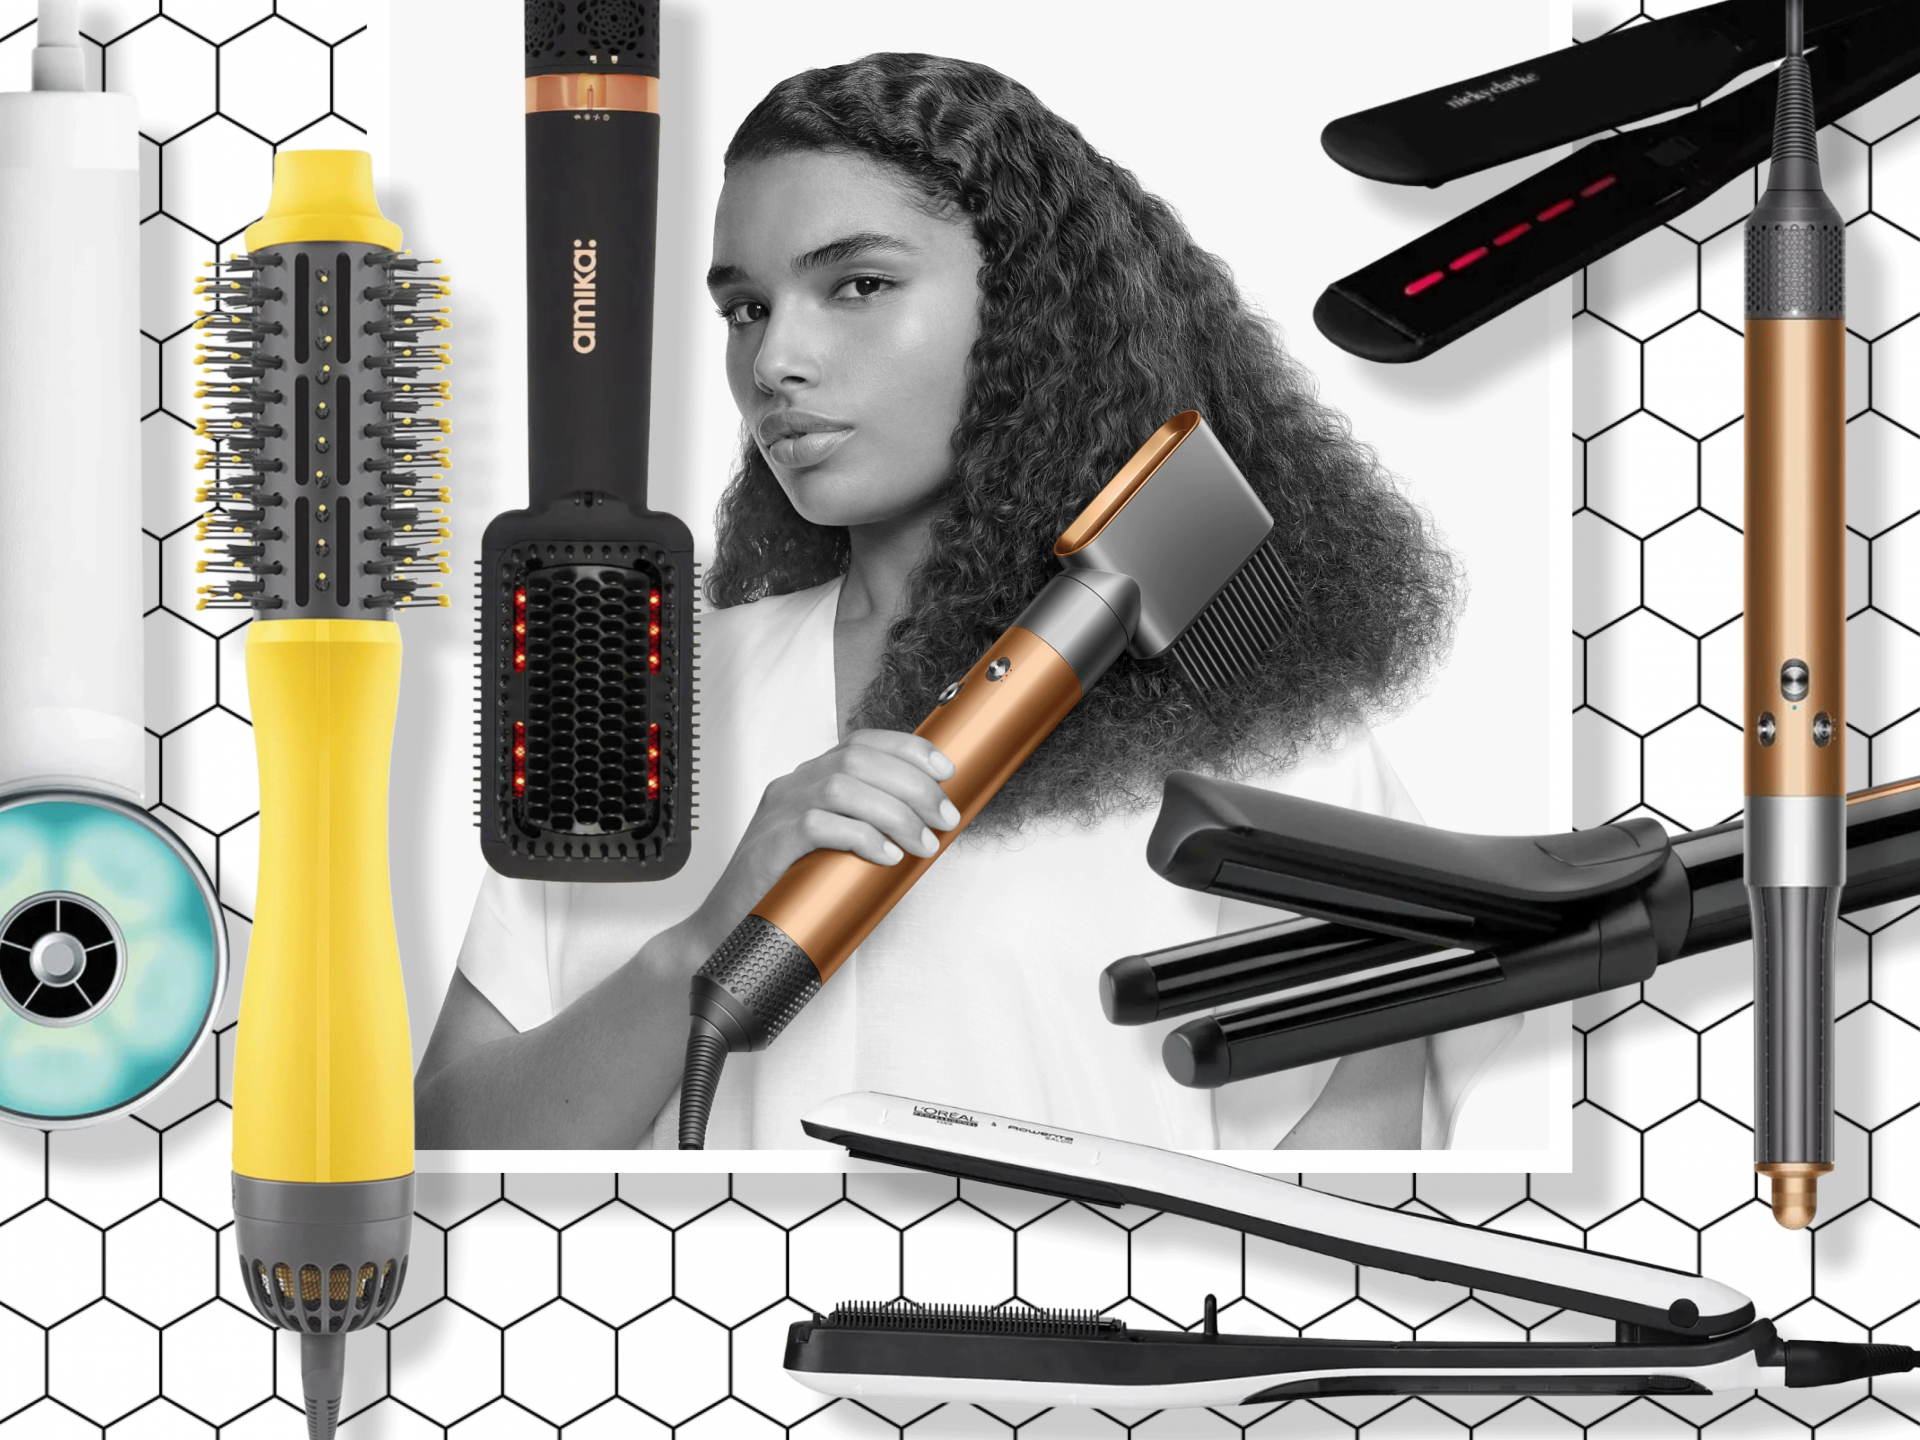 7 new heated hair tools and technology: Zuvi, Dyson, BaByliss